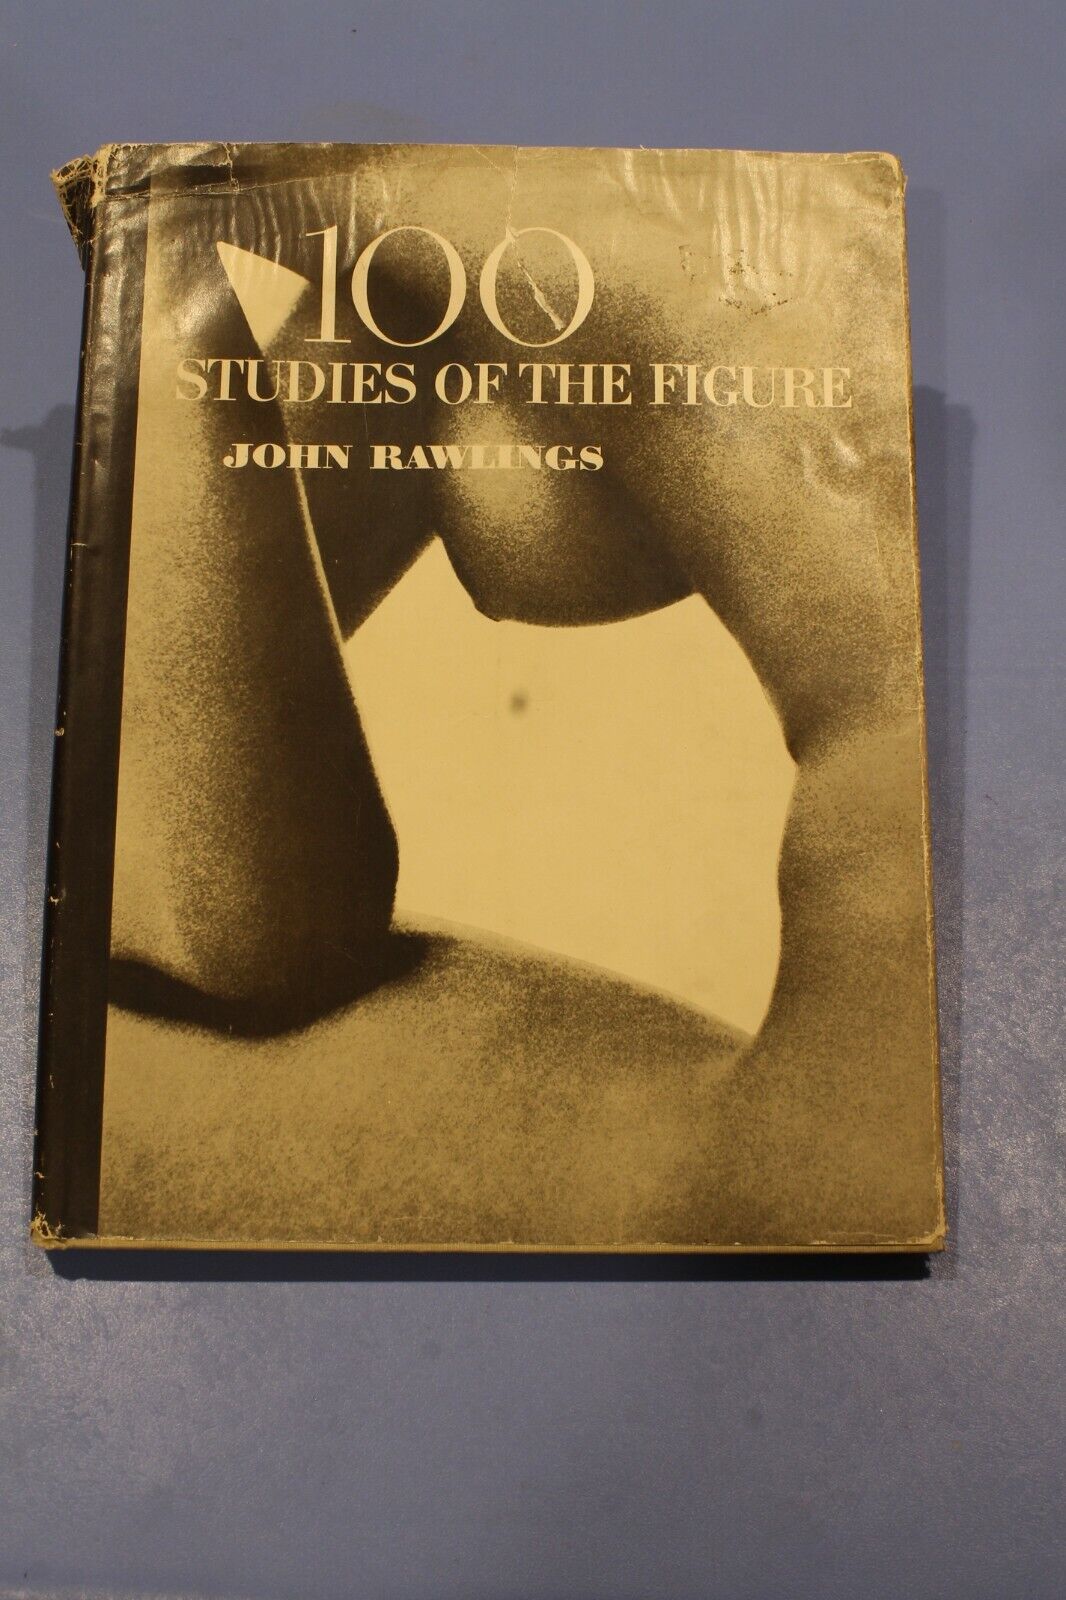 100 Studies of the Figure by John Rawlings, Nudes, Copyright 1951, First Edition